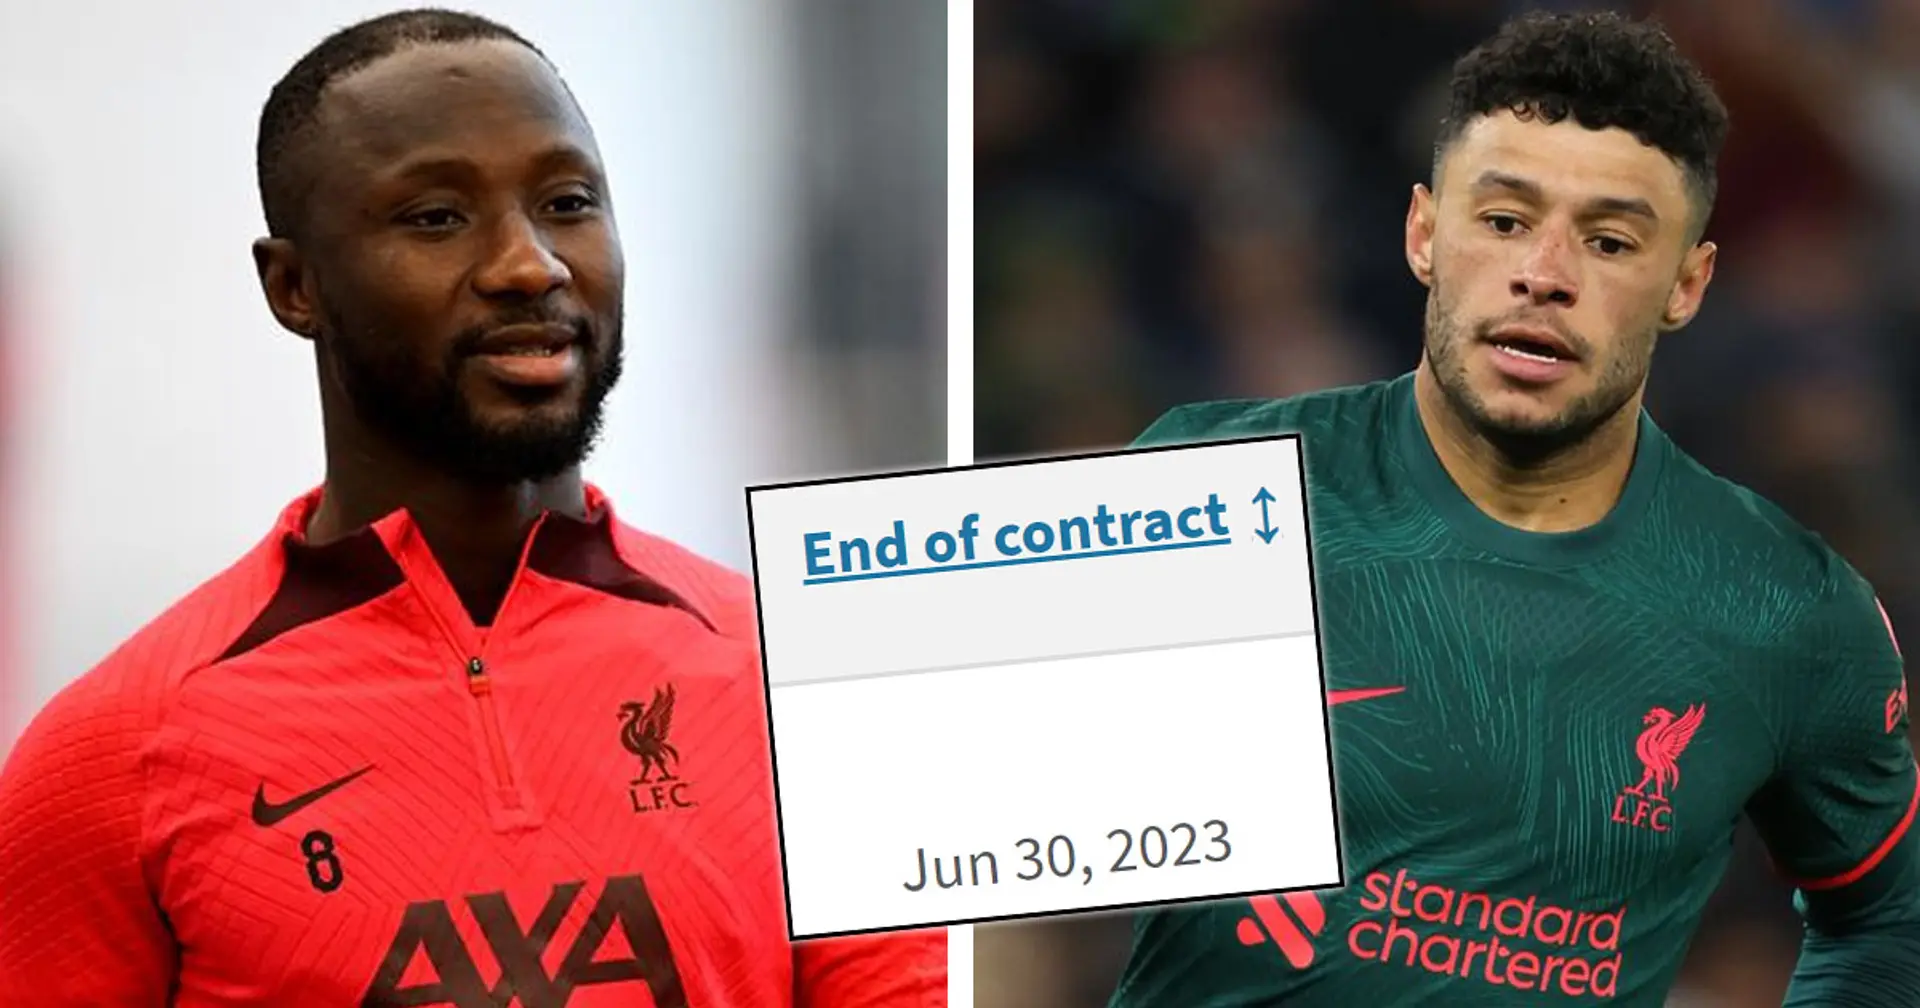 5 Liverpool players free to start negotiations with other clubs from today – we name them